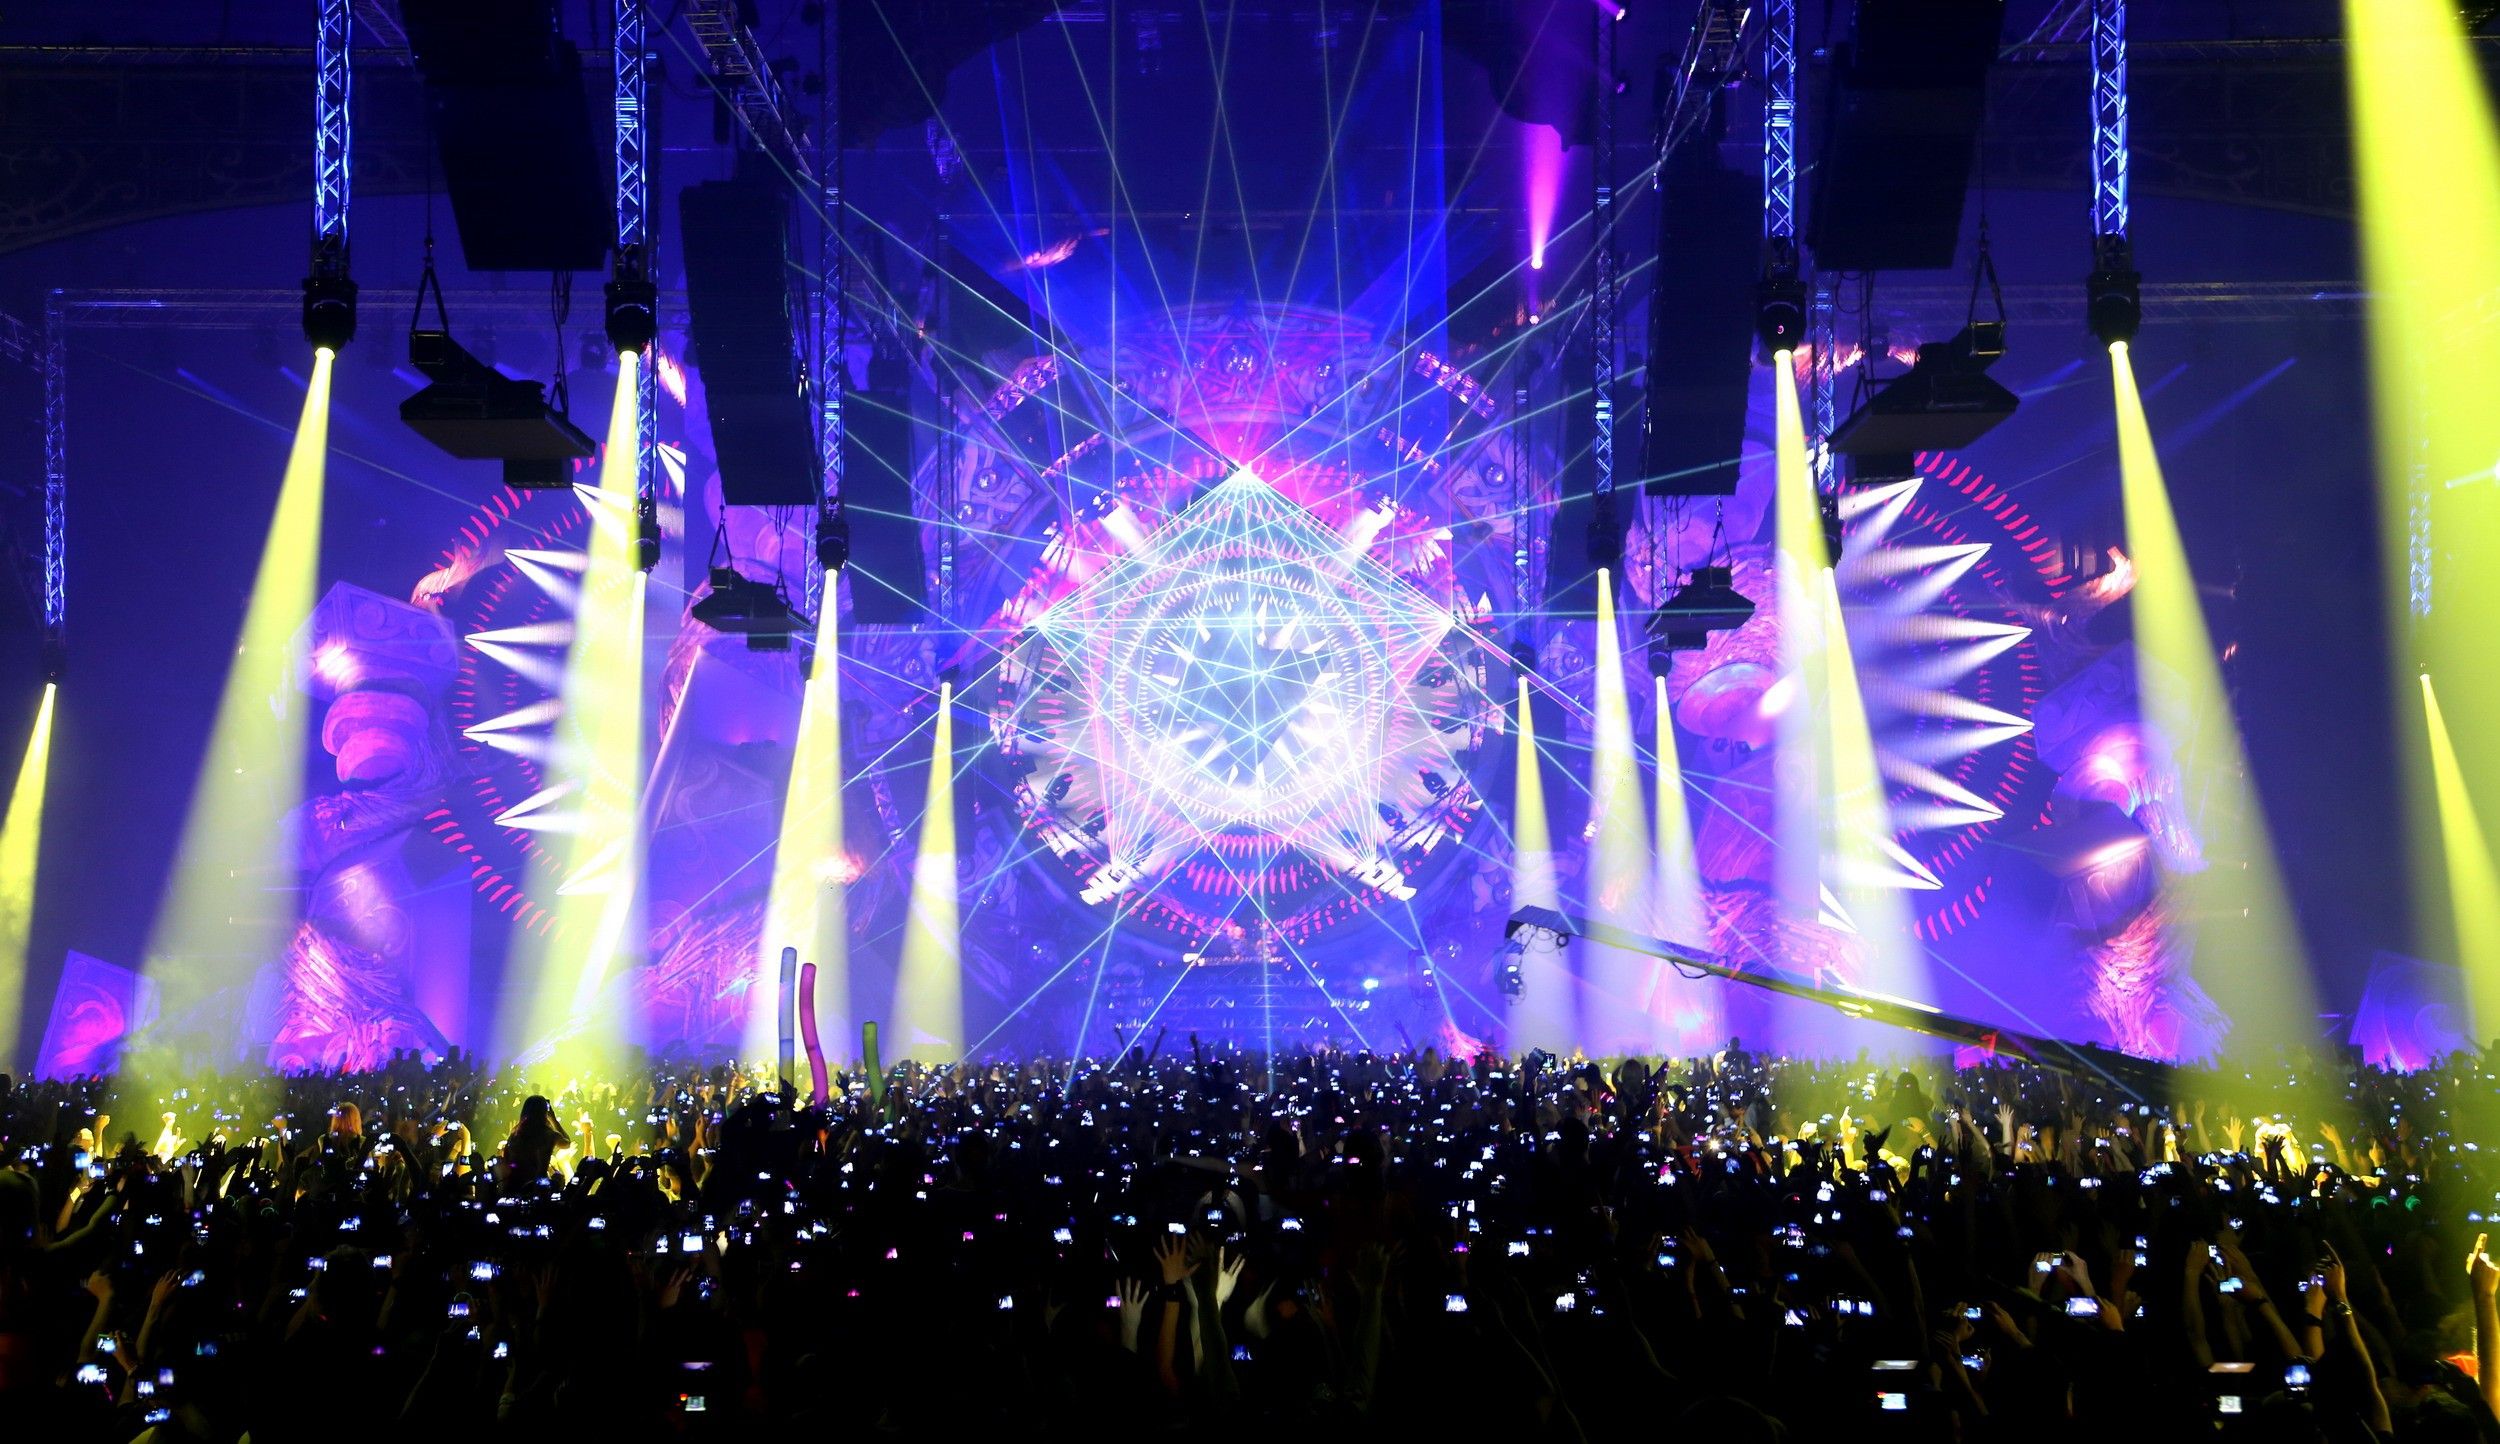 Music Background In High Quality: Qlimax By Cristina Nica, 16 09 2015